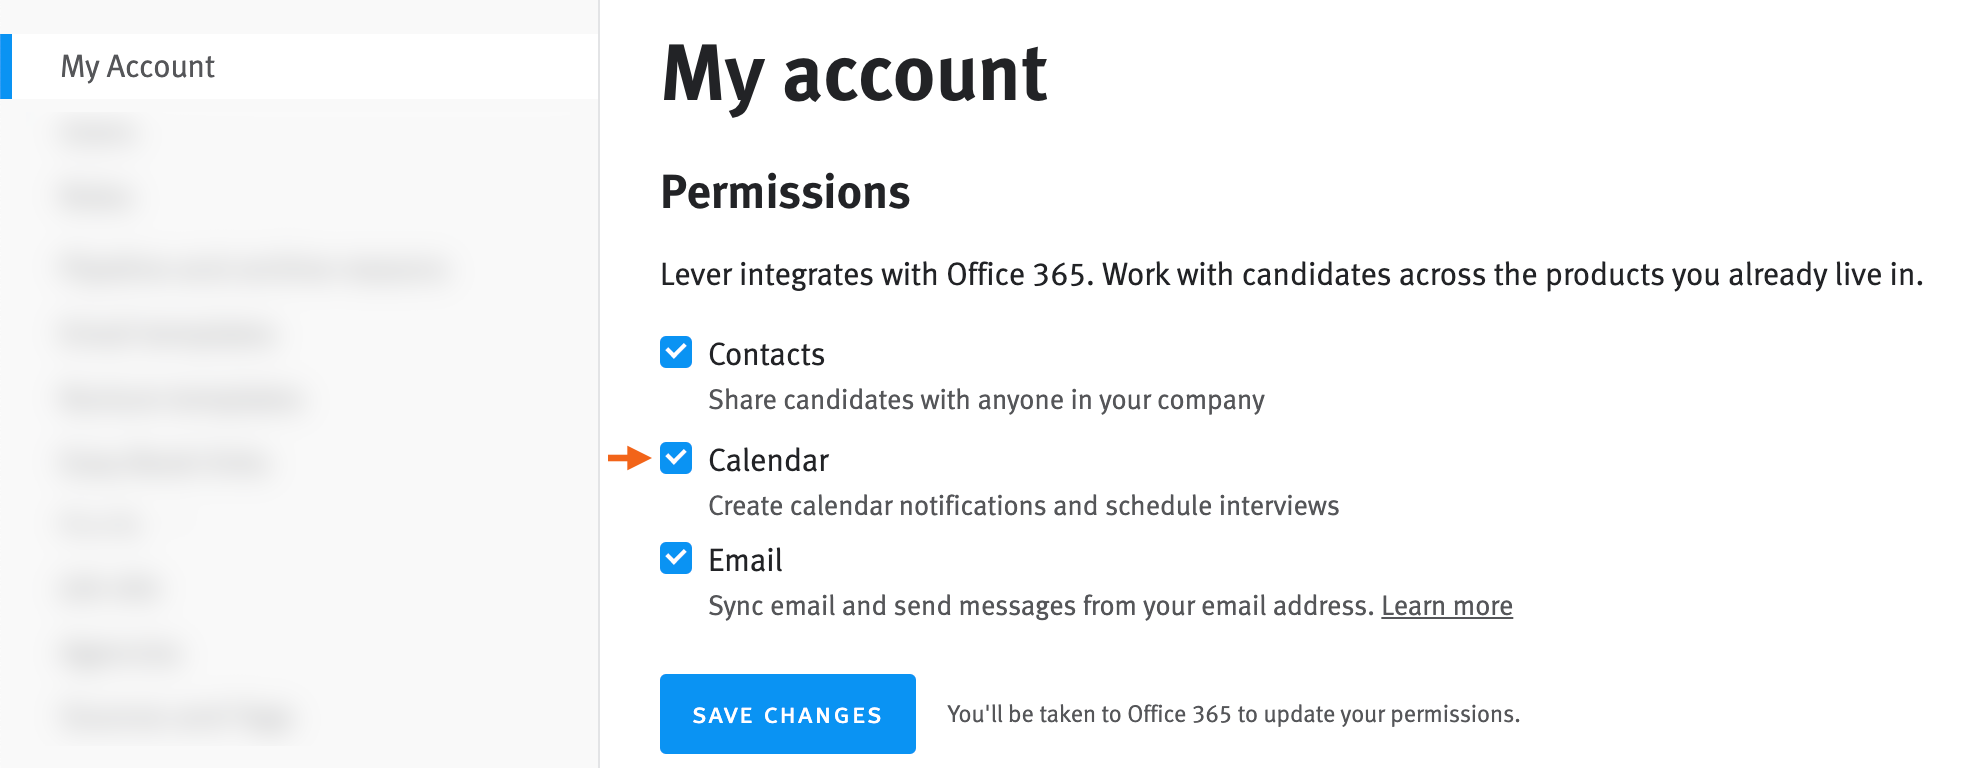 Permissions checkboxes in personal accoutn setttings; arrow pointing to Calendar checkbox.